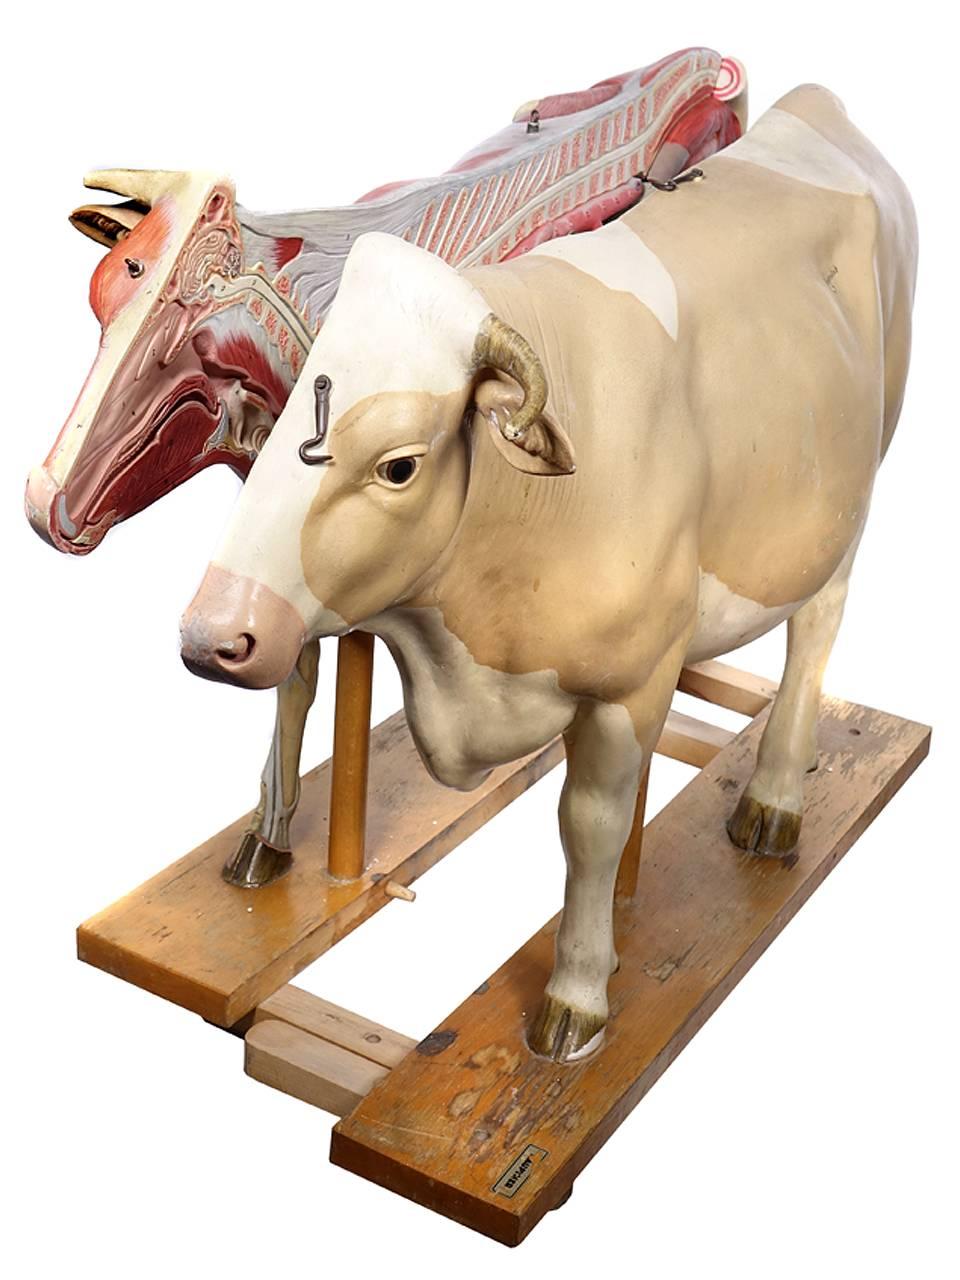 This rare German papier mâché teaching model measures over 36 inches long and 21.5 inches tall. The base is wood and splits in two along with the cow. One side shows a beautiful realistic animal and the other shows the musculature. It opens to show